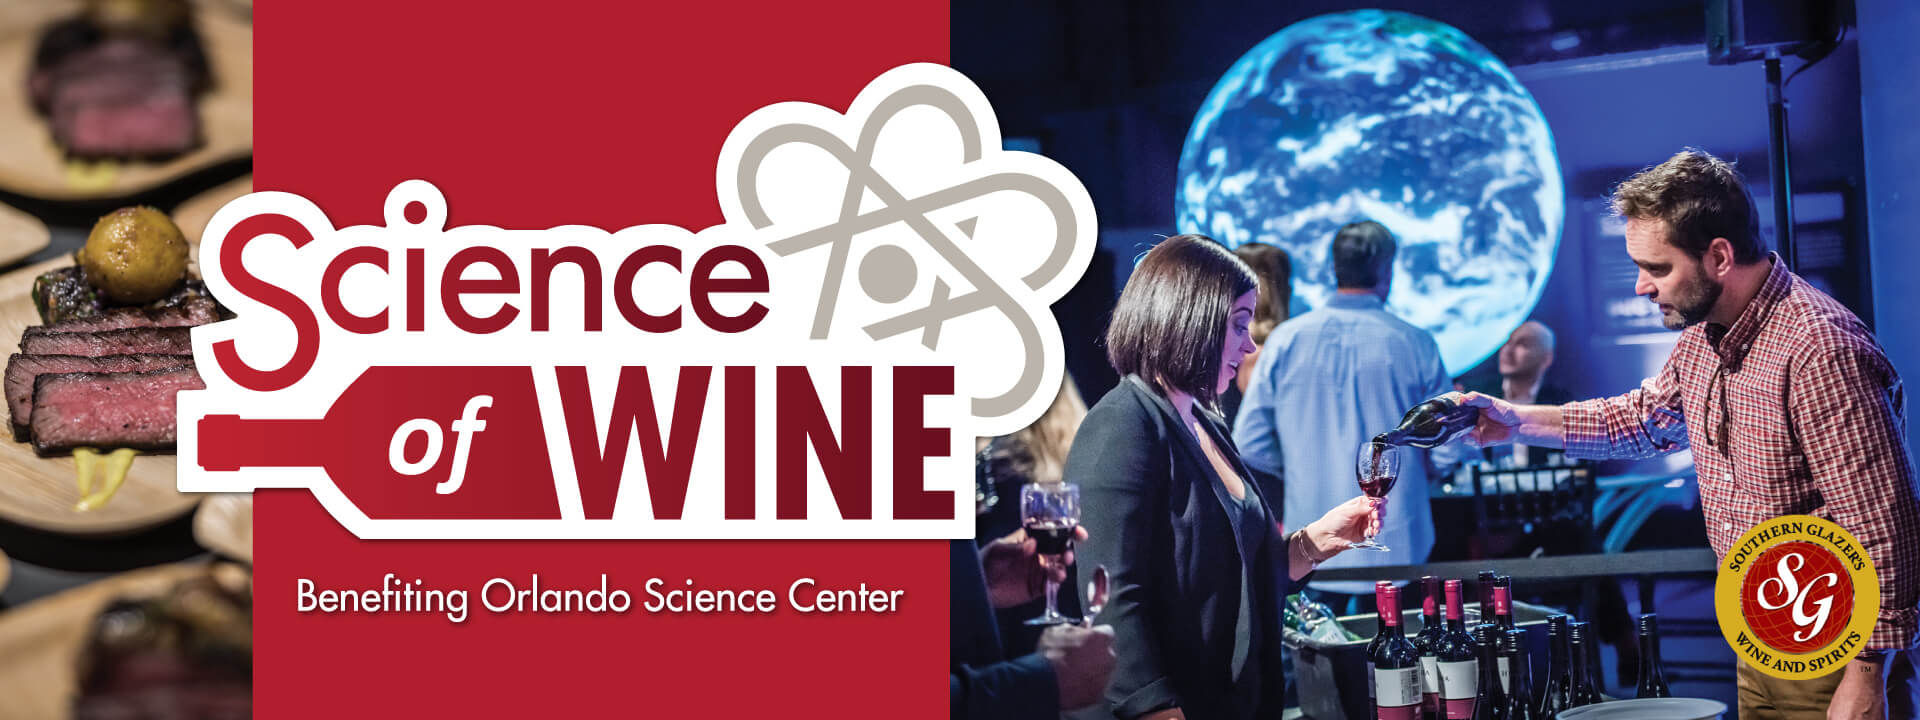 Science of Wine logo and photo of guests enjoying the event.